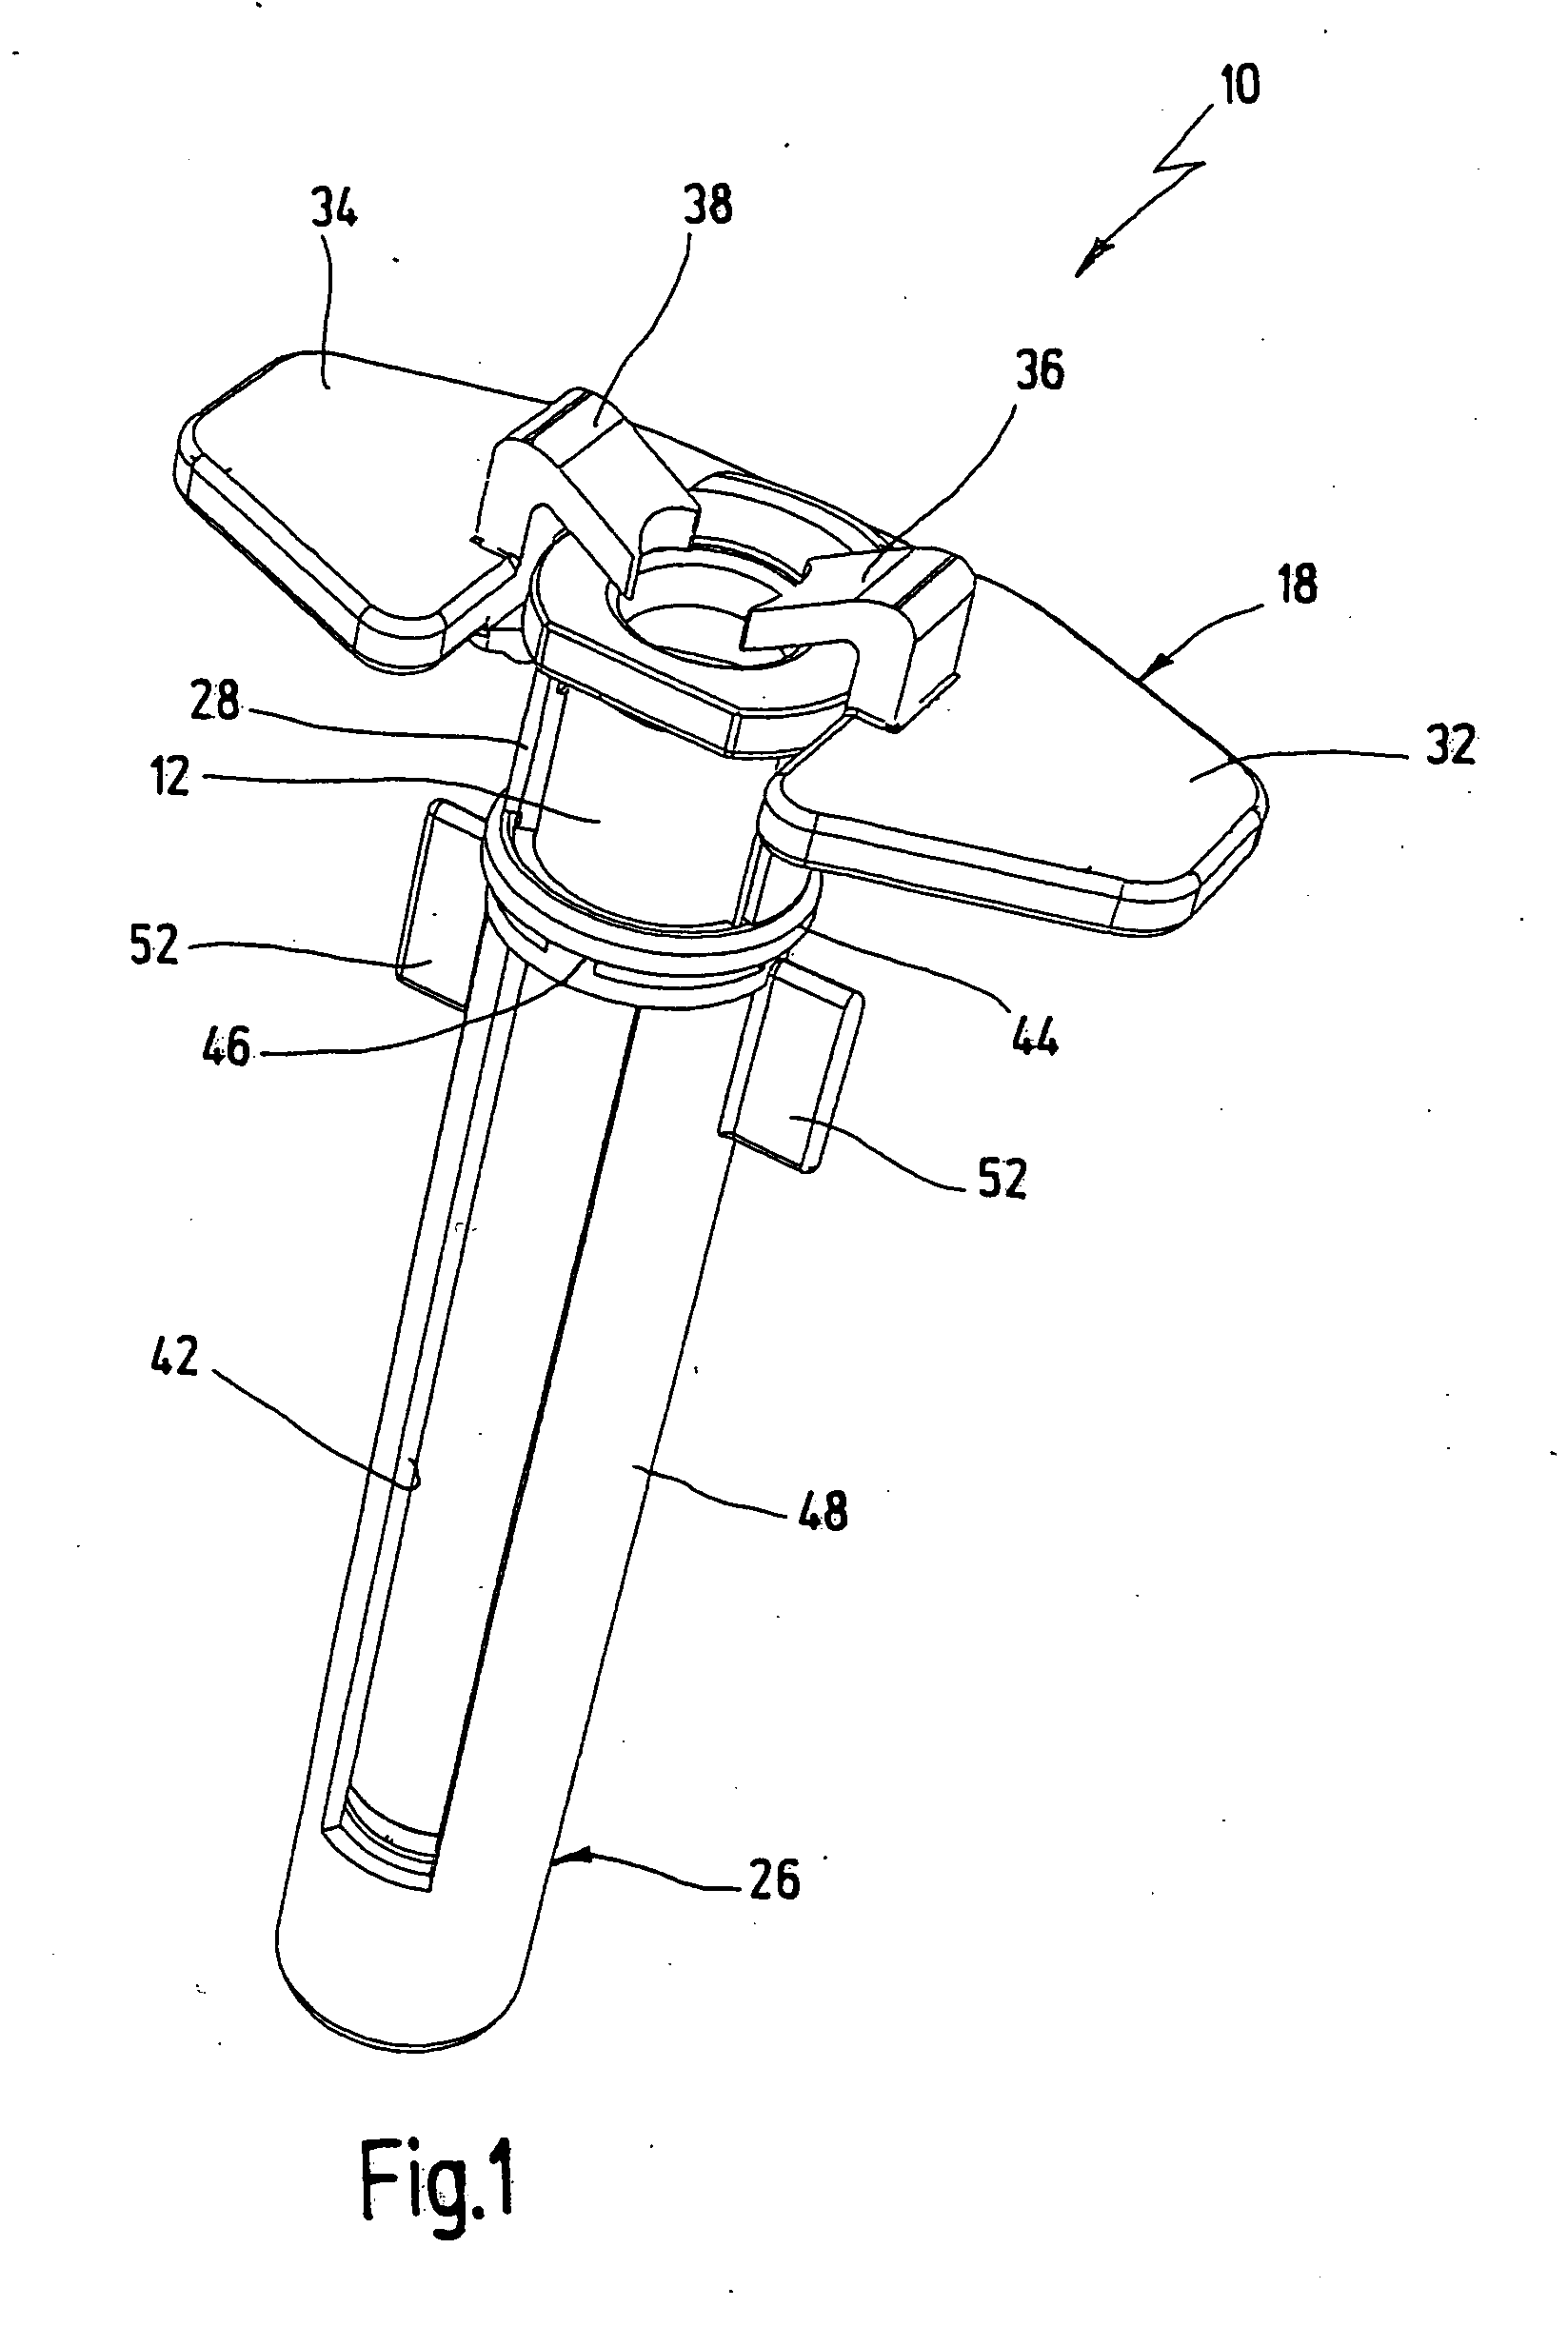 Arrangement for storing, transporting and administering a liquid